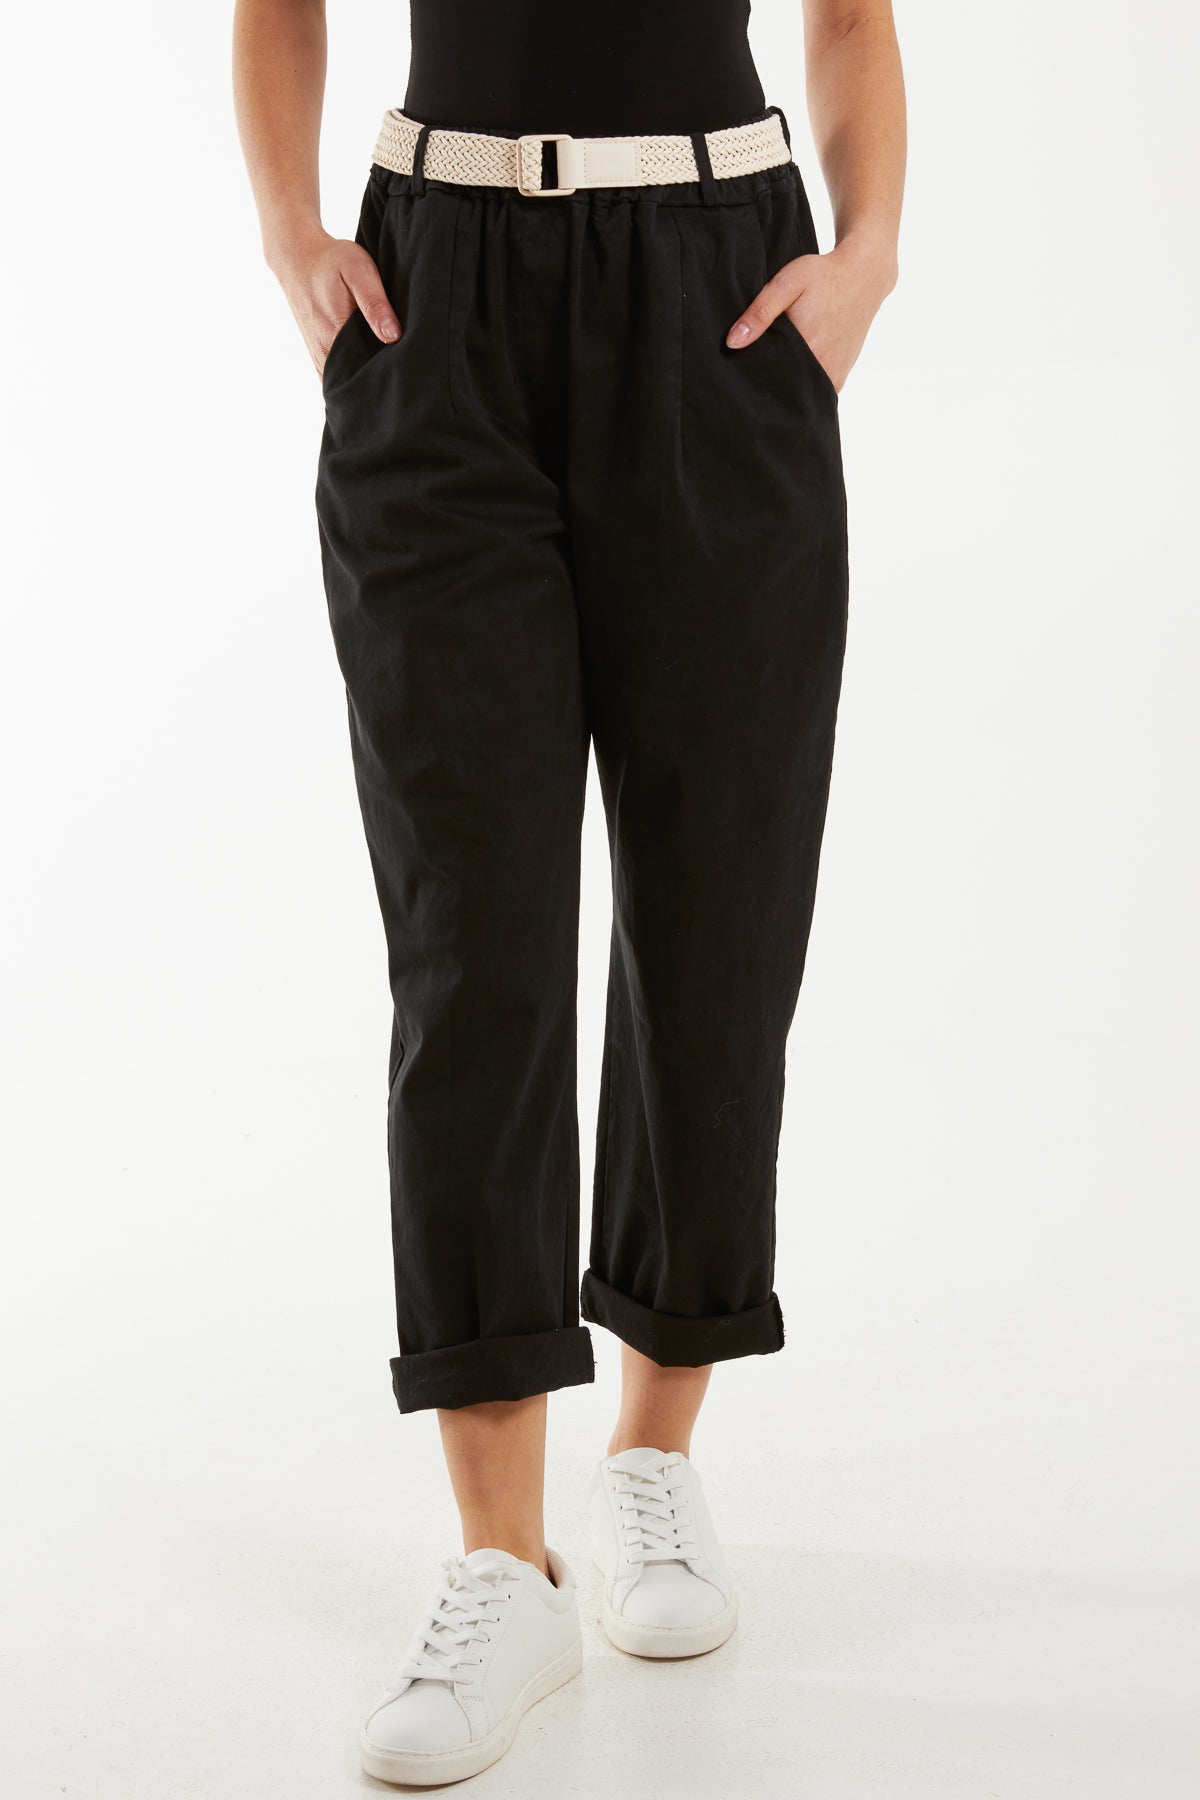 Belted High Waisted Cotton Drill Chinos